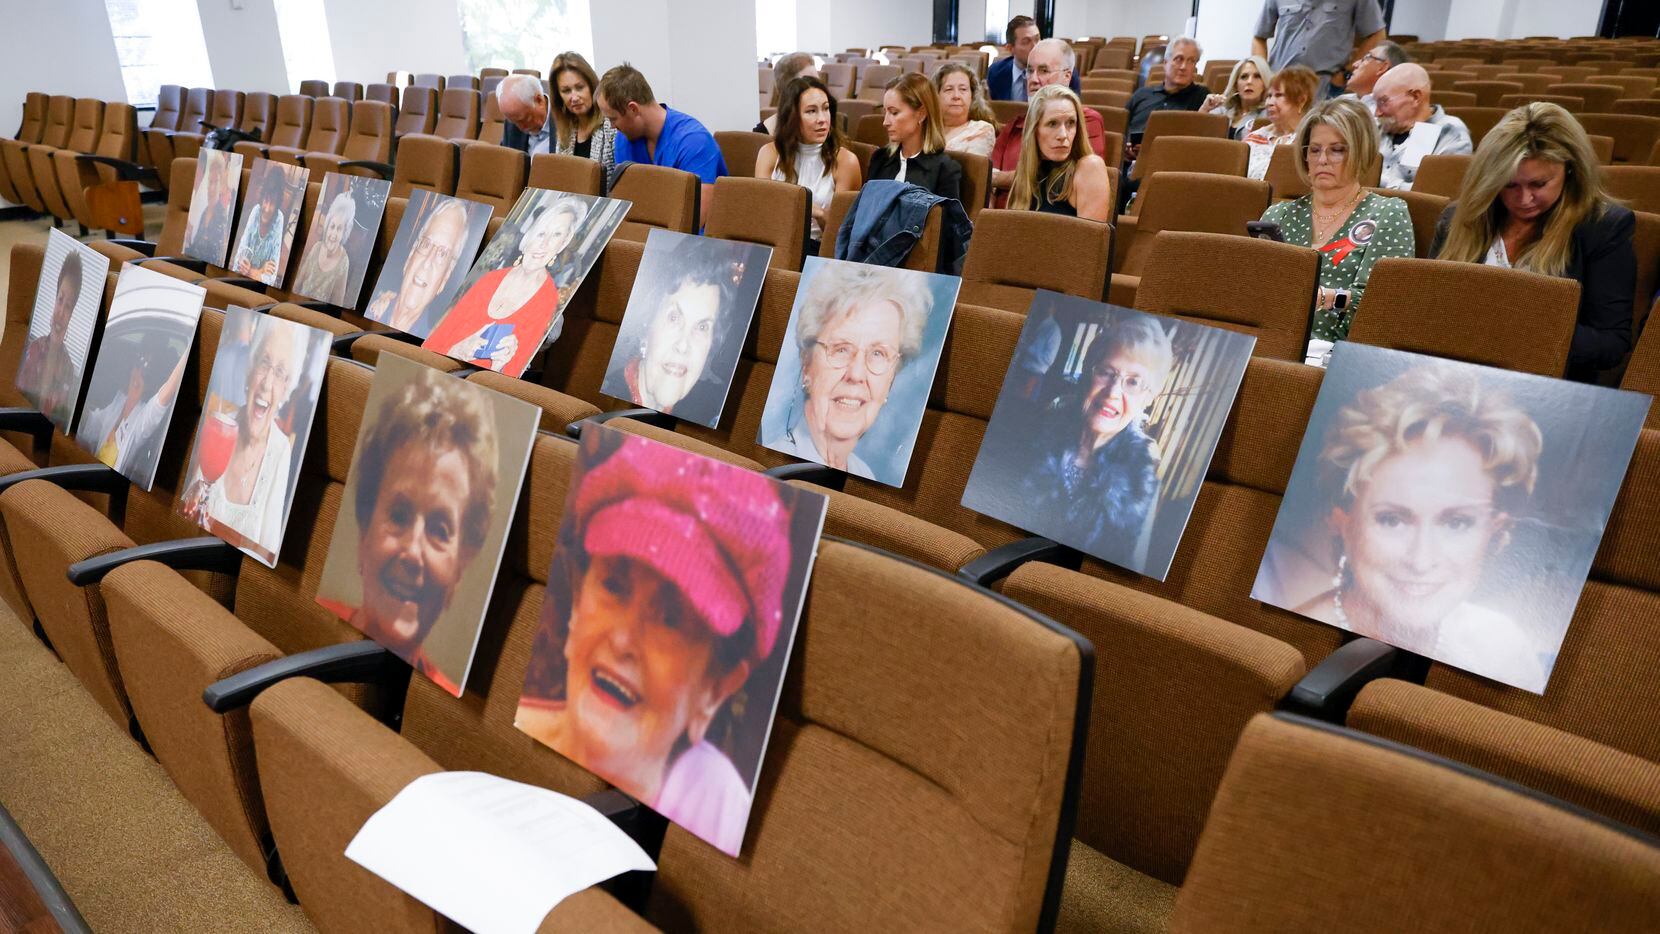 Photos of the victims of accused serial killer Billy Chemirmir were posted in the central...